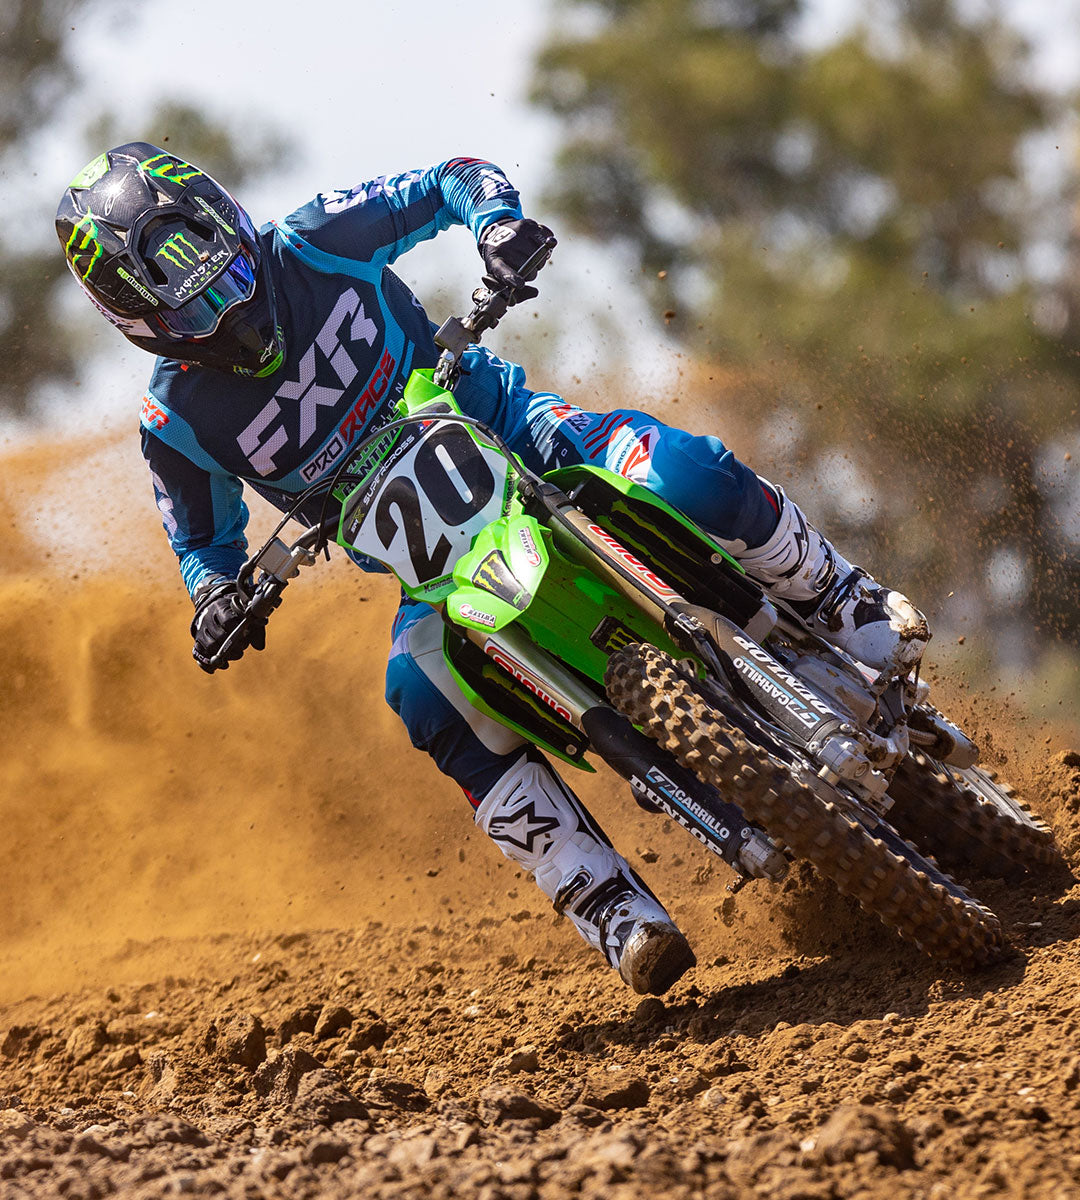 An image of a MX rider sporting the '24 Revo jersey and pant